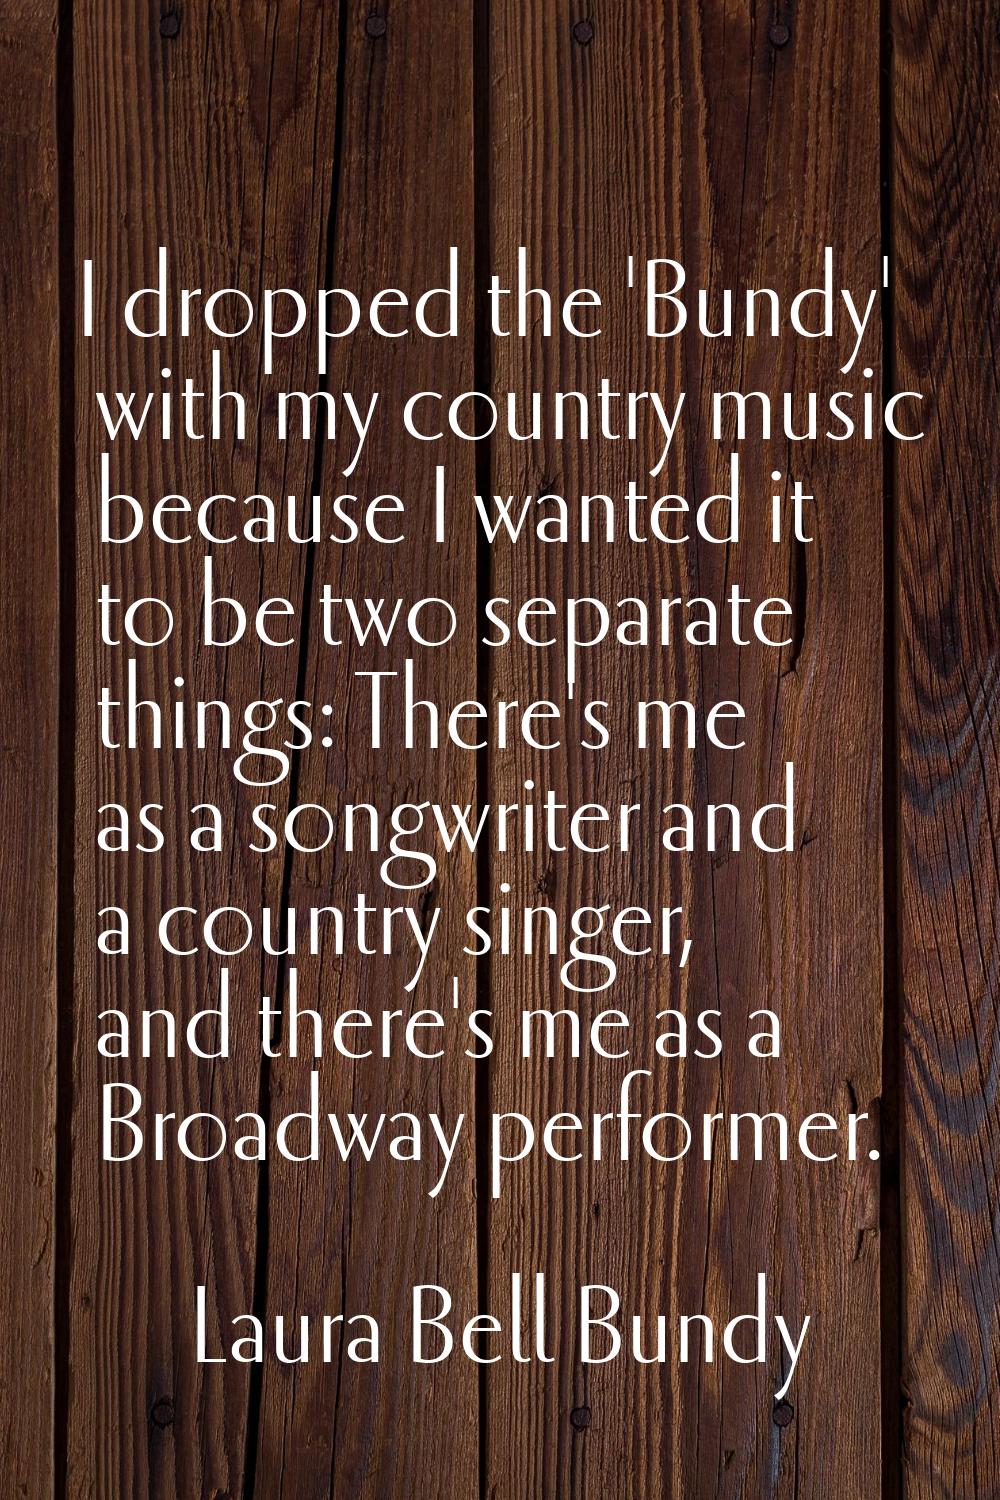 I dropped the 'Bundy' with my country music because I wanted it to be two separate things: There's 